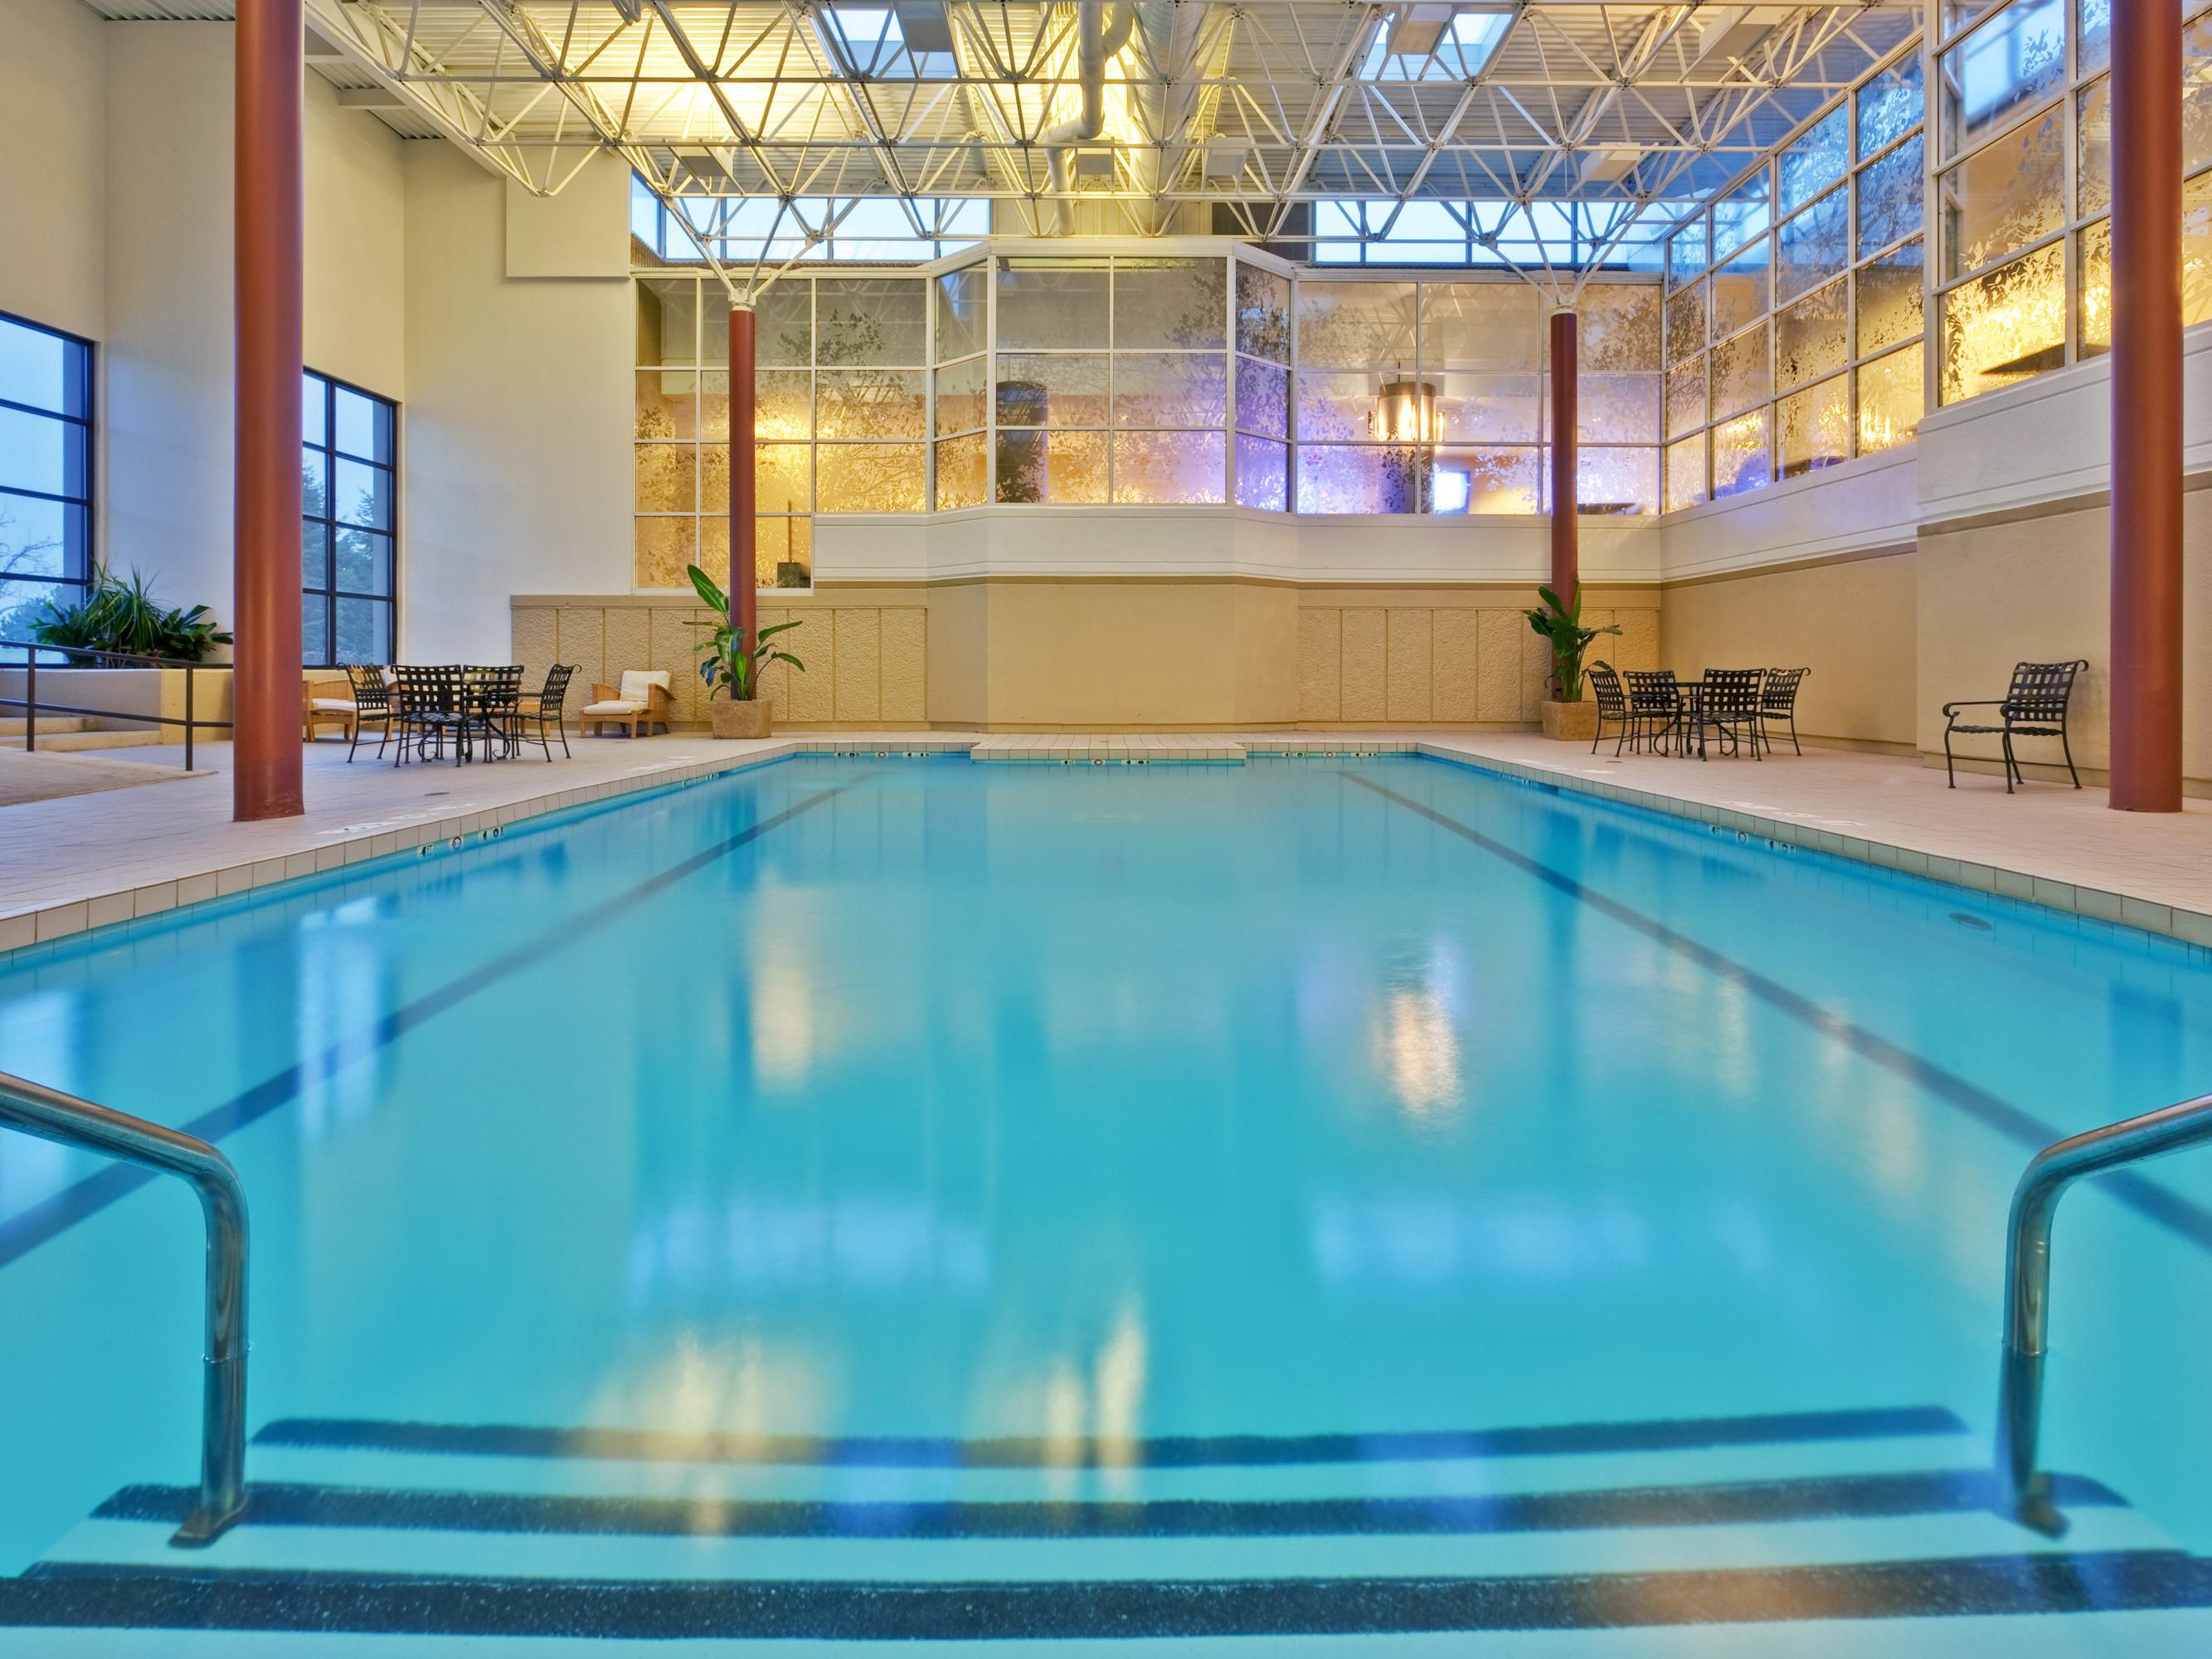 Nestled within the hotel's all-season atrium, our indoor heated pool invites you to unwind at the end of a long day. Immerse yourself in the soothing waters and let your stress melt away. Whether you want to swim a few laps, float on your back, or splash around with your kids, our pool is your peaceful escape.